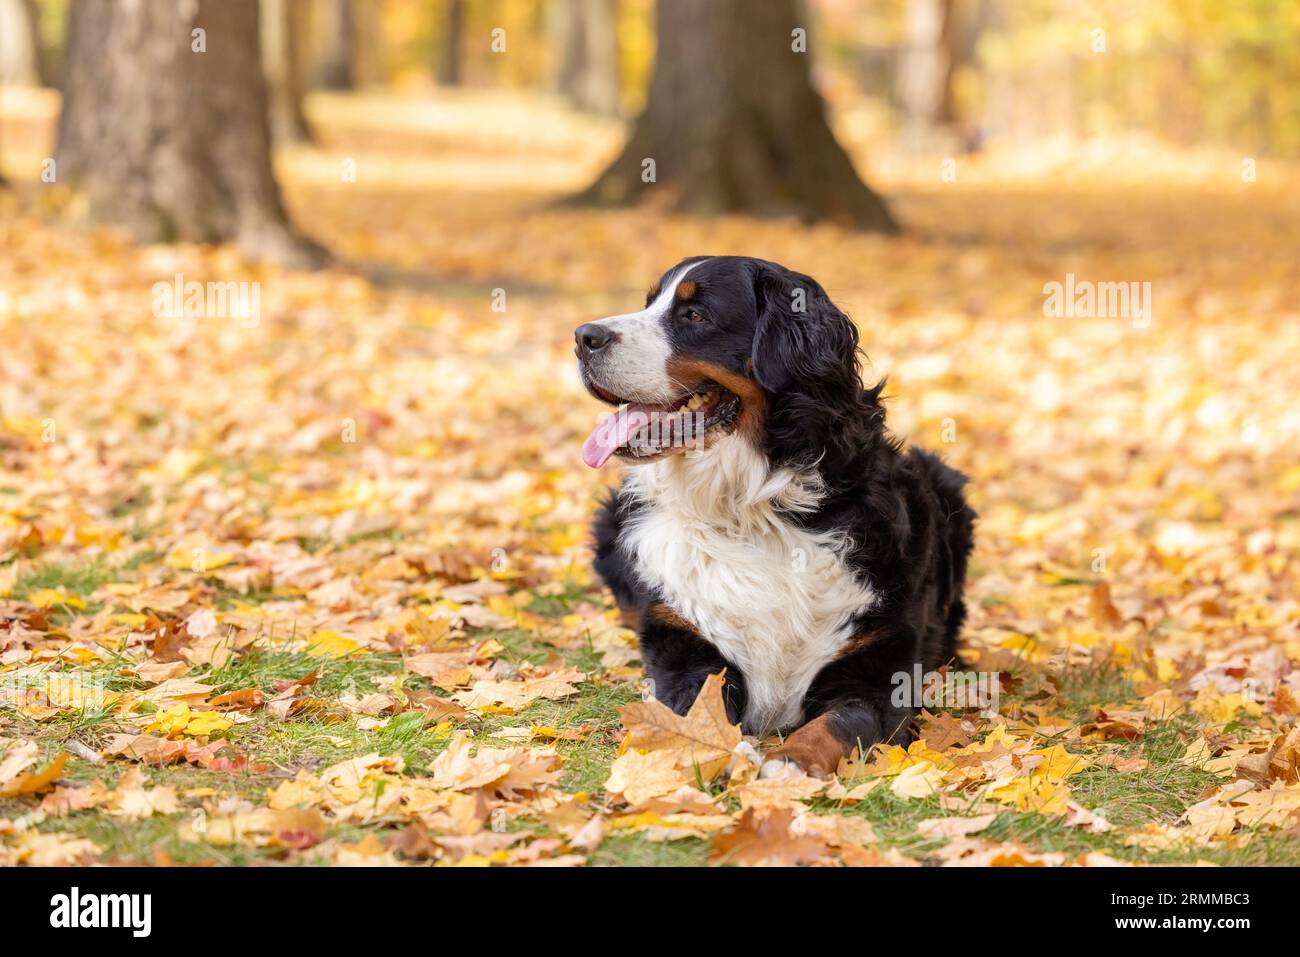 A happy Bernese Mountain Dog looks off to the side while lying down in a carpet of fall colored leaves Stock Photo